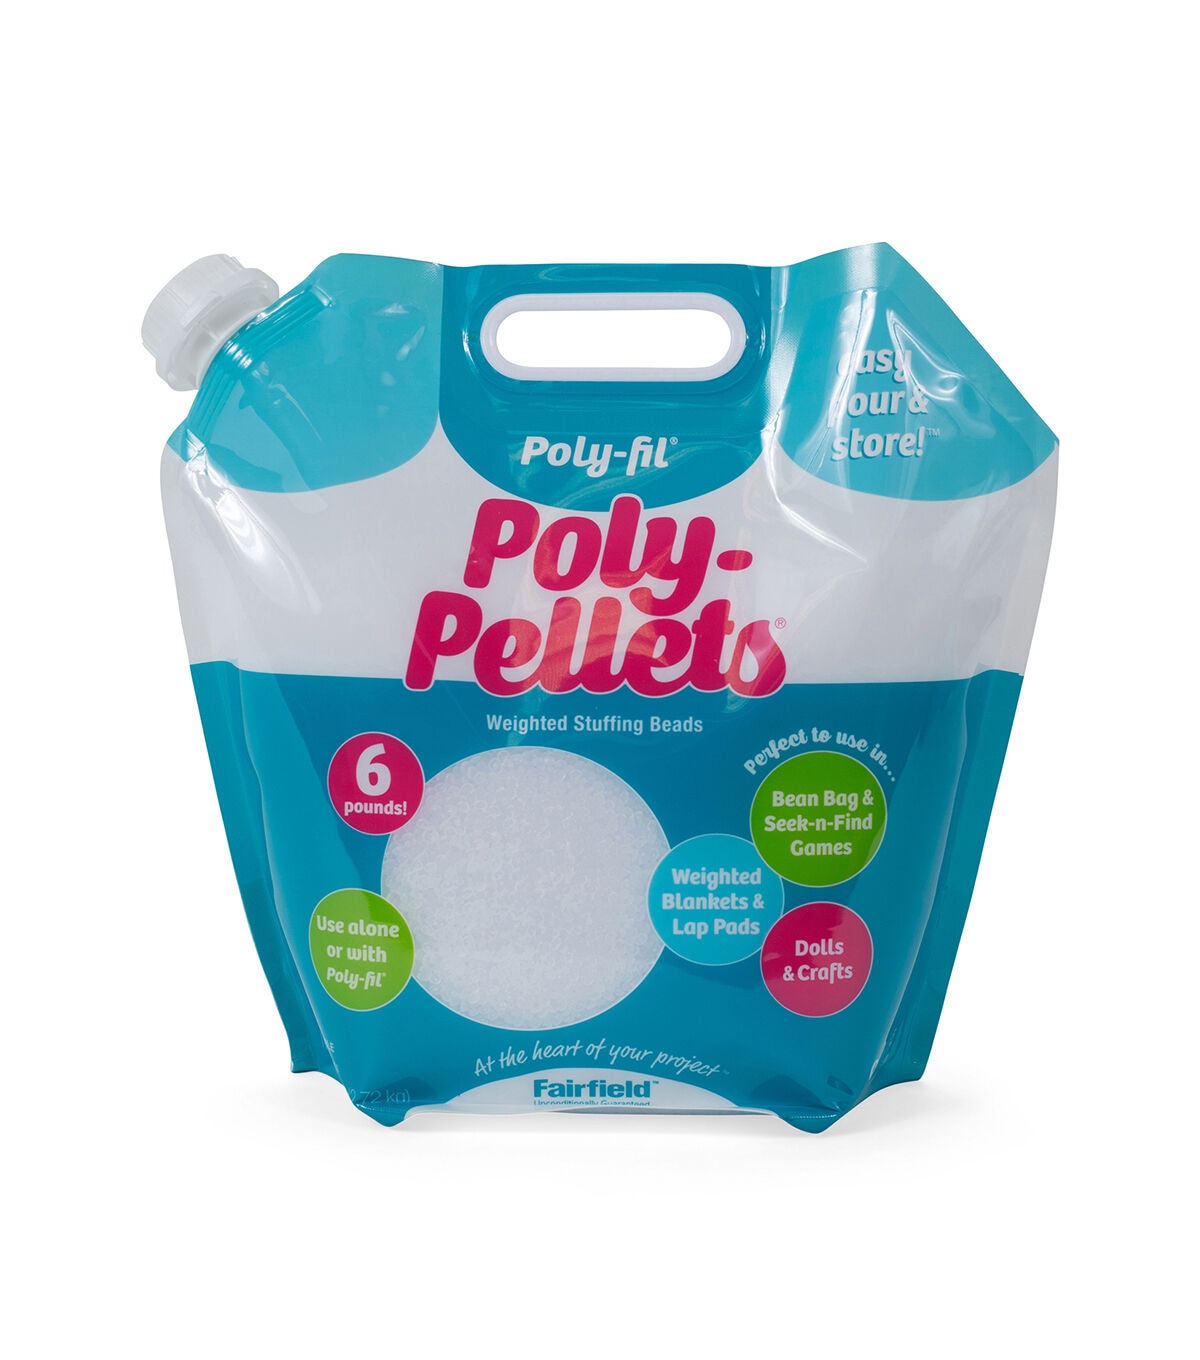 Poly-fil Poly-Pellets 96 oz Weighted Stuffing Beads